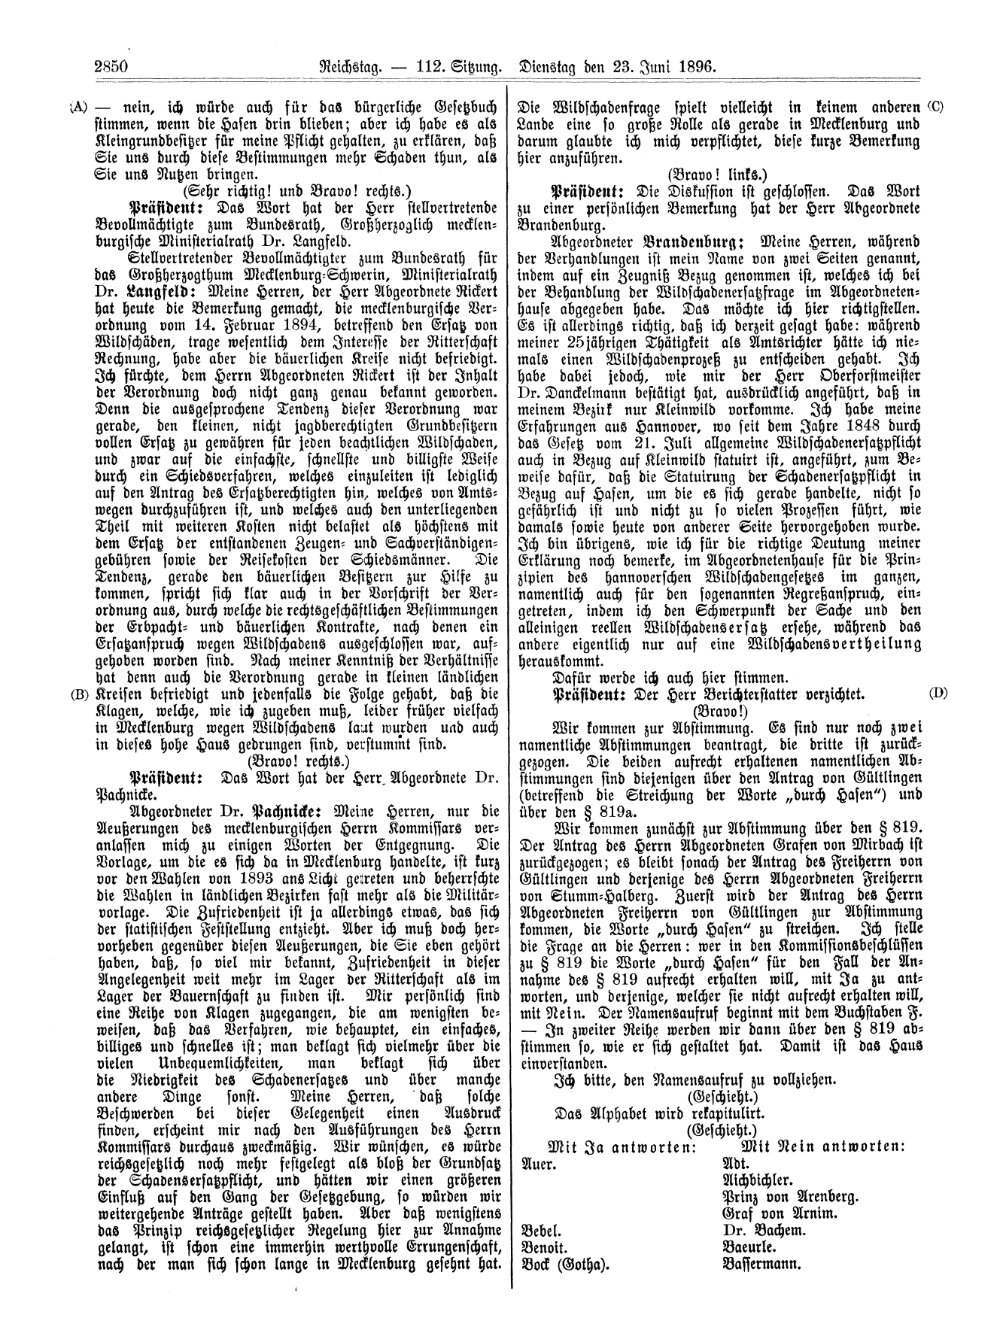 Scan of page 2850